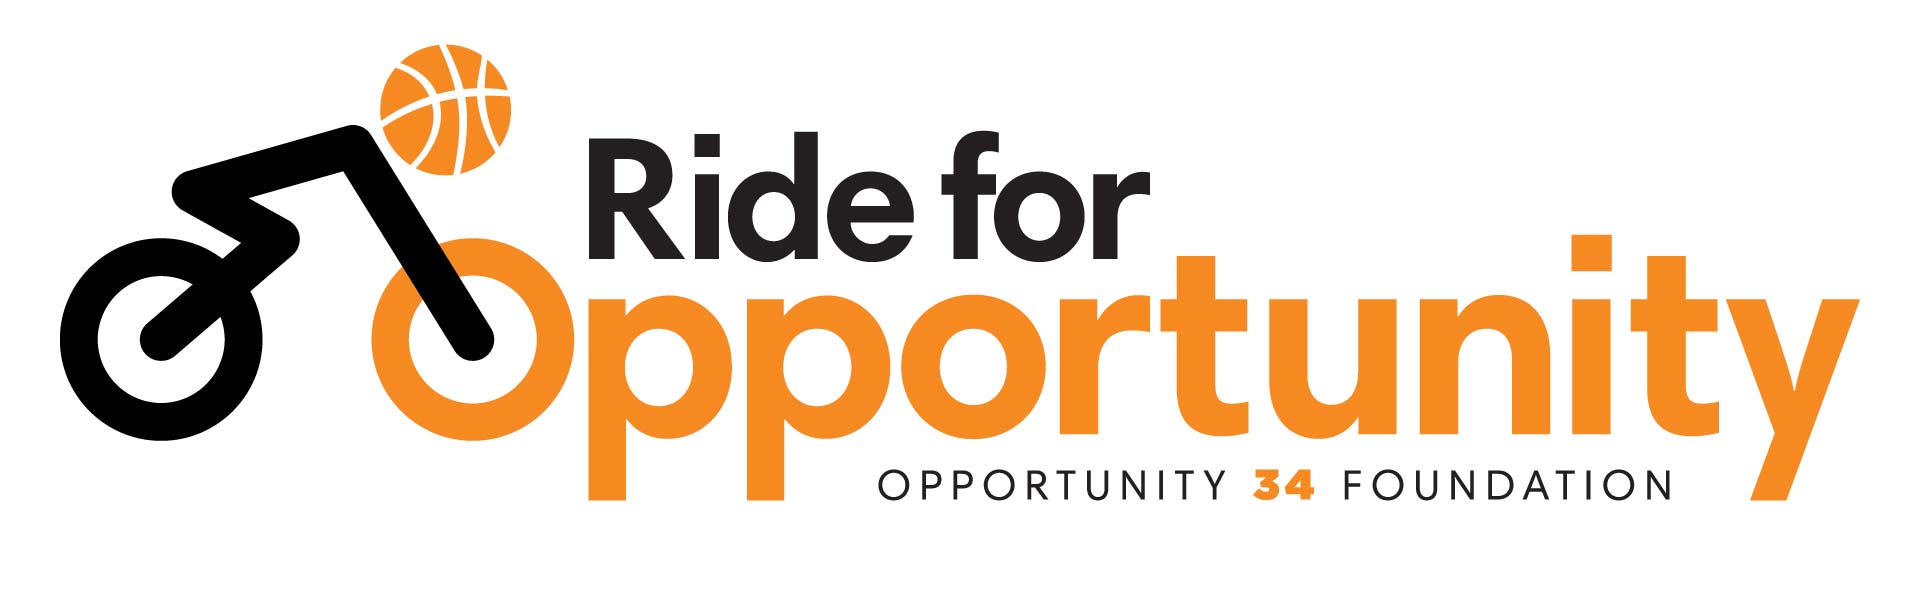 Ride for Opportunity